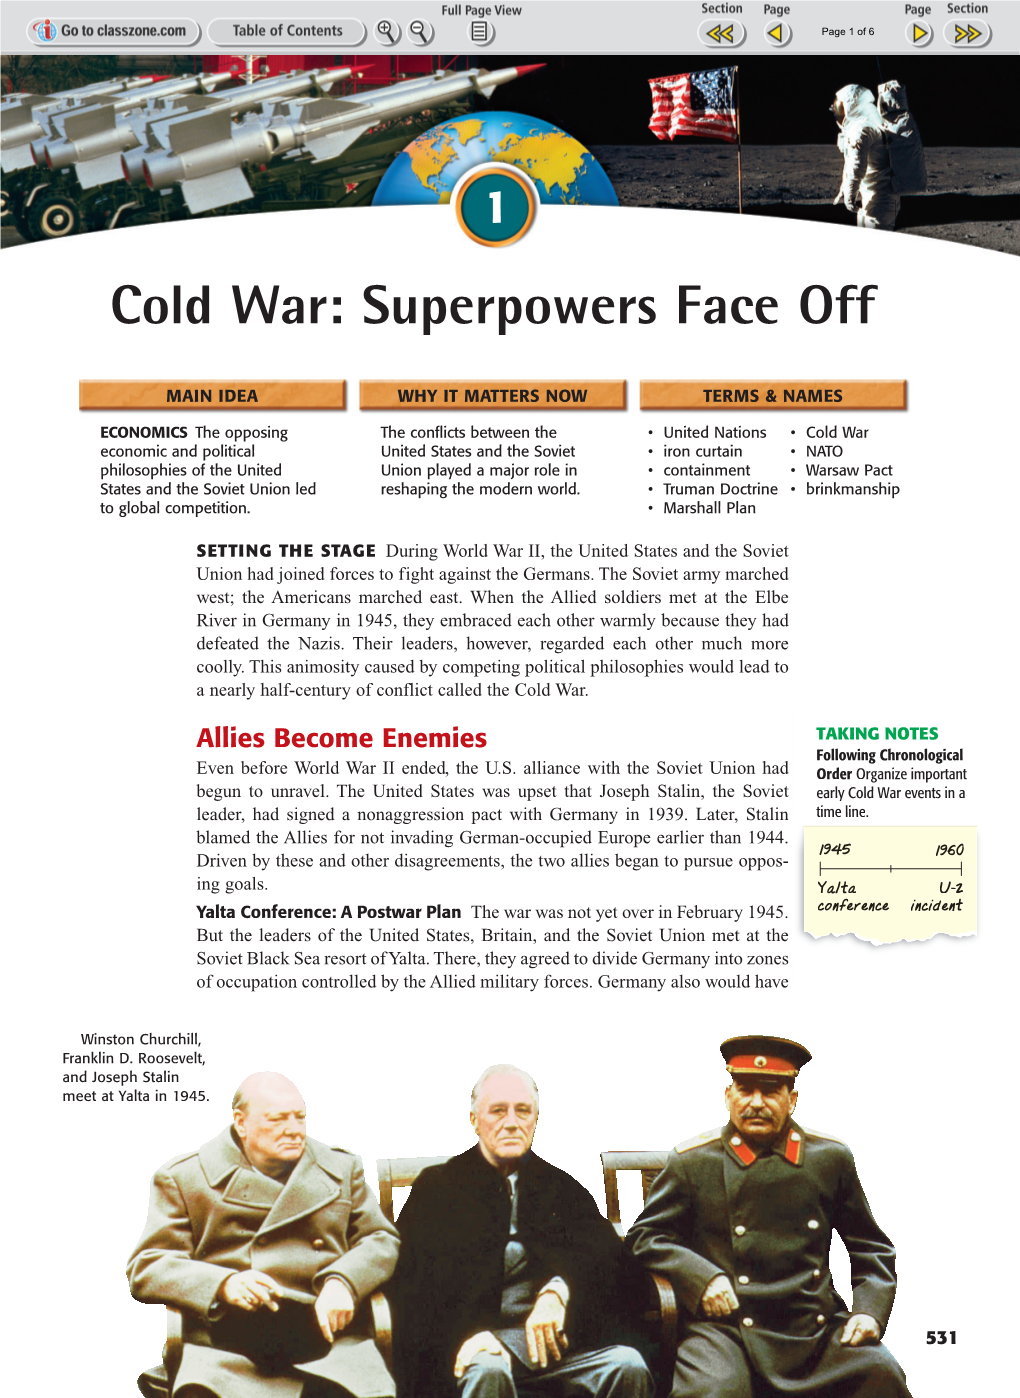 Cold War: Superpowers Face Off